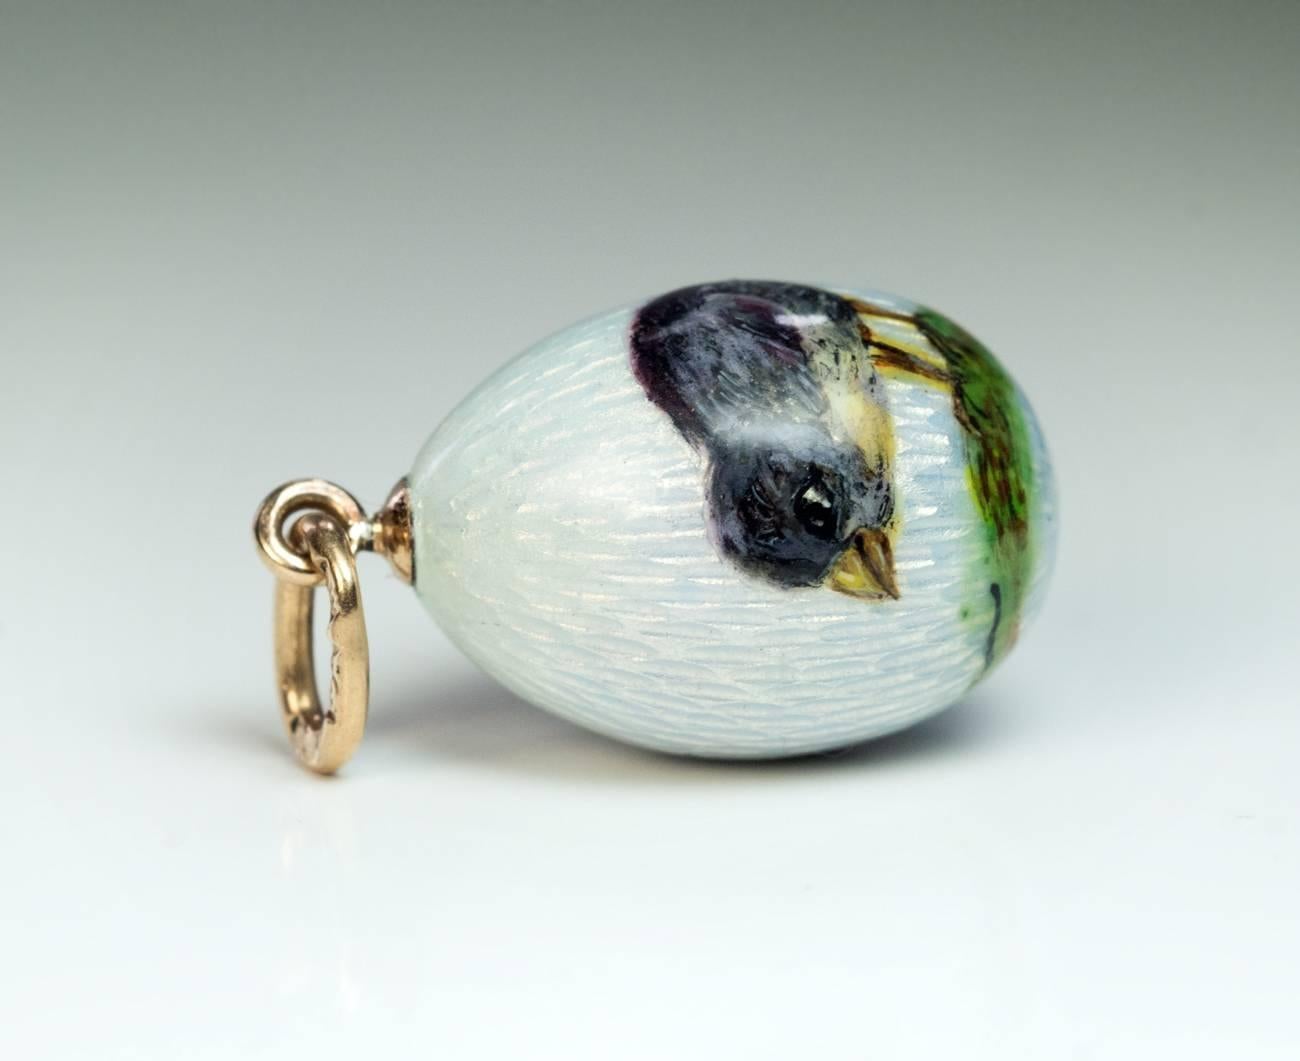 Made in St. Petersburg between 1908 and 1917
A rare original pre-1917 FABERGE miniature egg pendant is covered with a very fine pale blue guilloche enamel. One side of the egg is painted enamel of a bird standing on grass.
The egg is marked on its